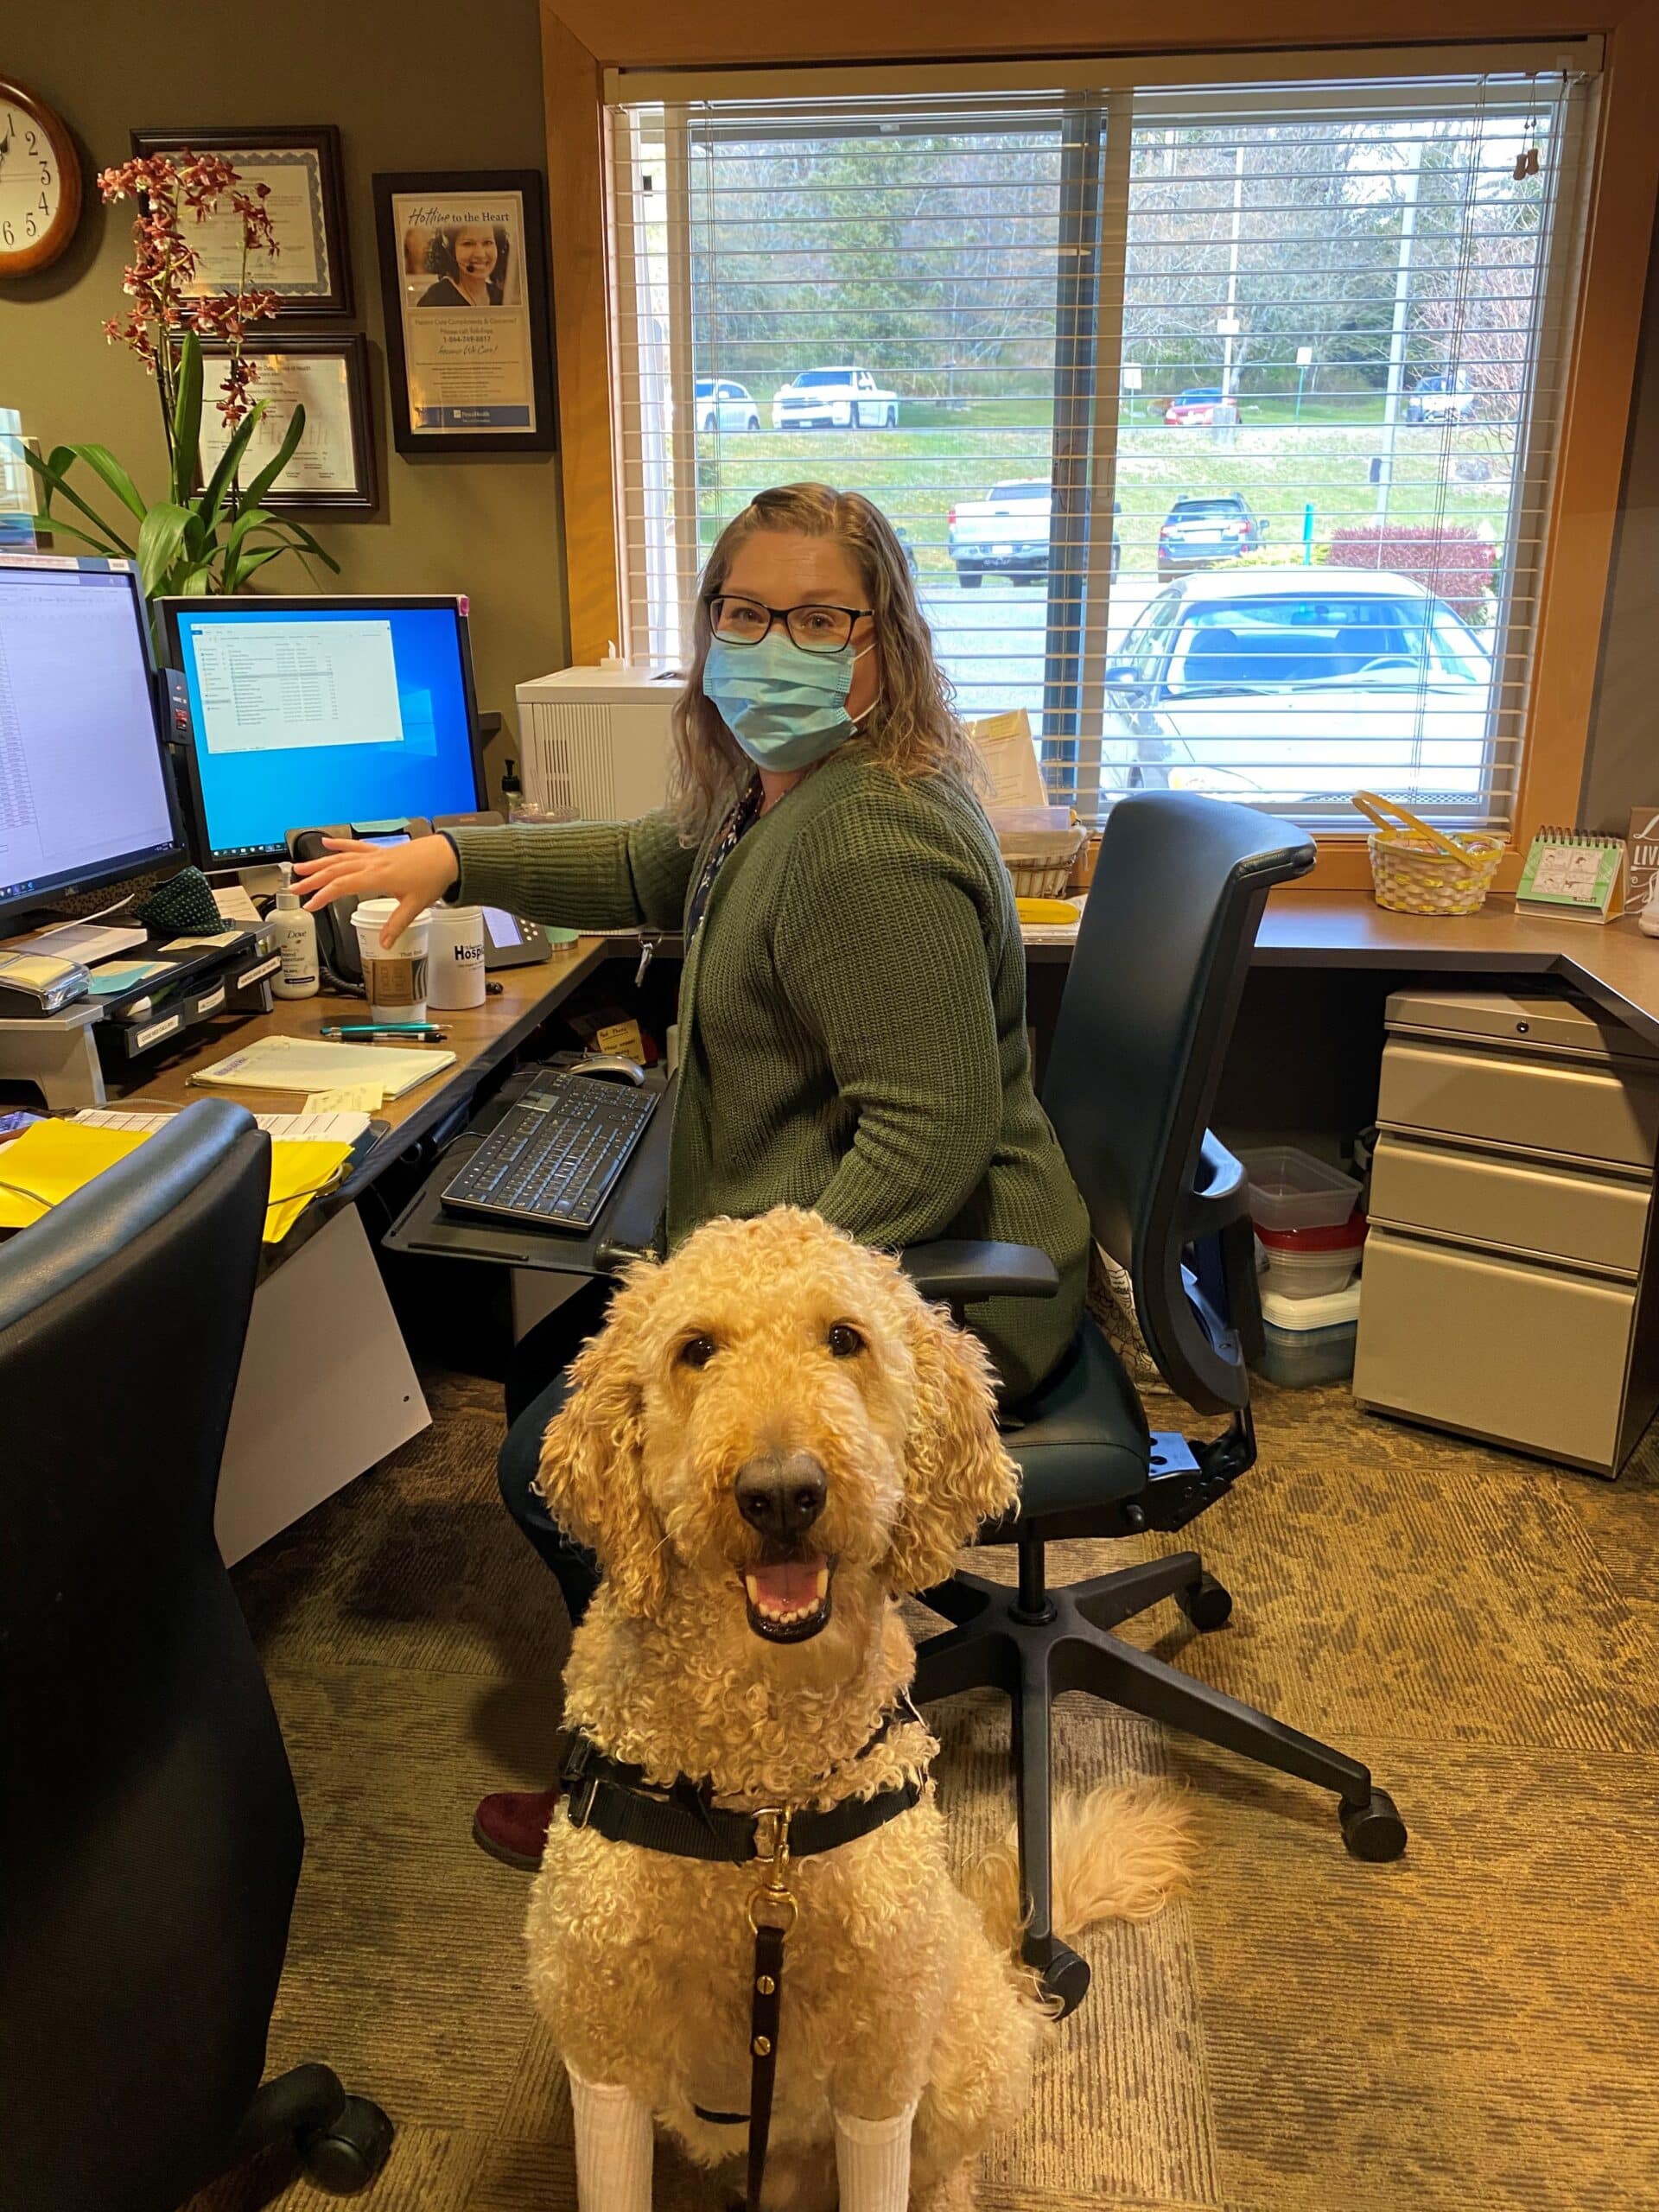 A golden doodle therapy dog visits a hospice staff member in her office